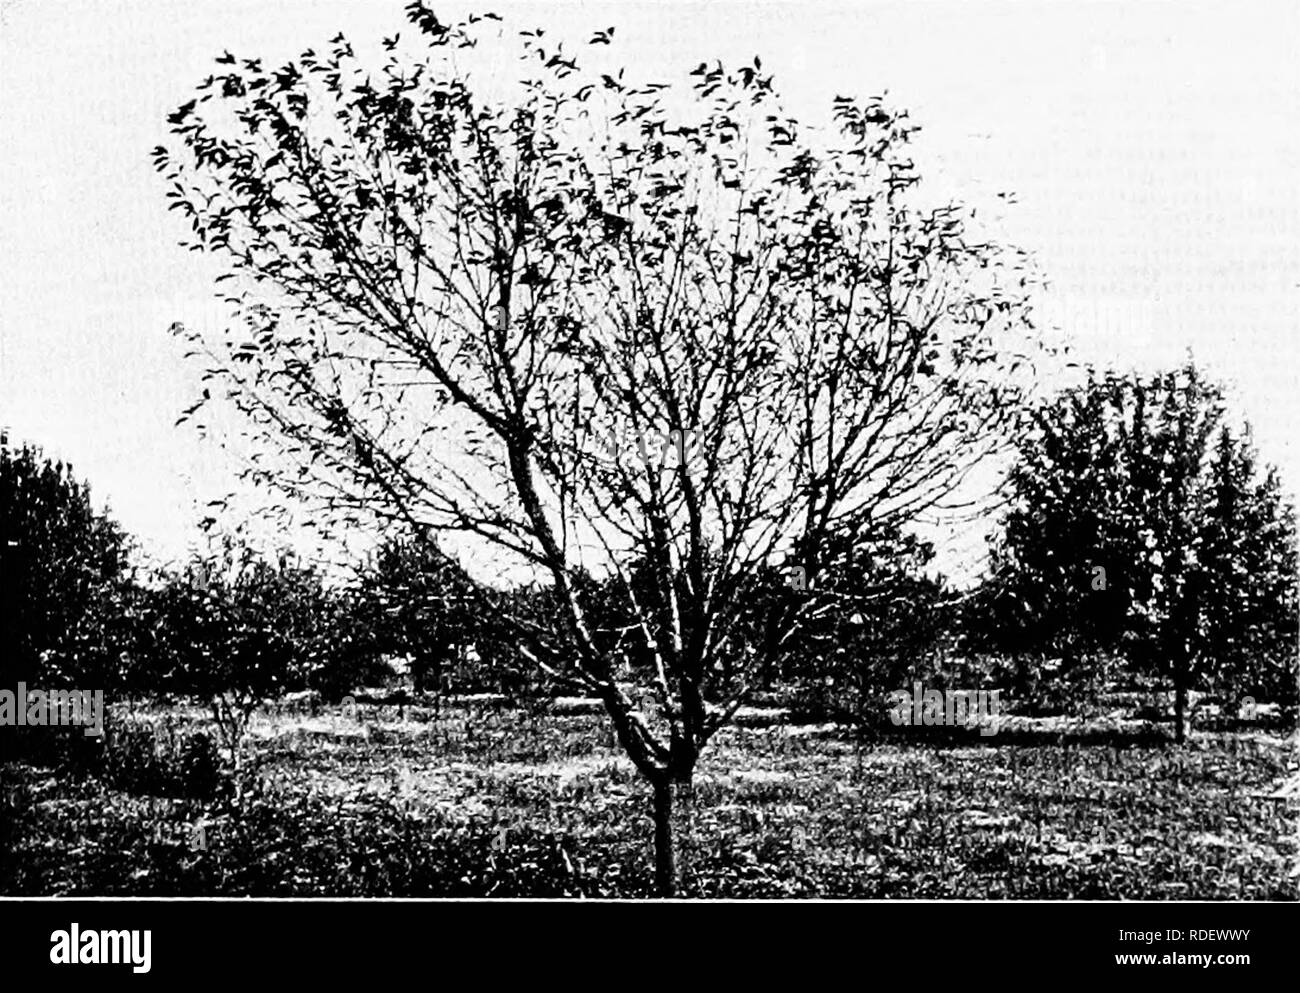 . Diseases of economic plants . Plant diseases. 116 DISEASES OF ECONOMIC PLANTS APRICOT Yellows. See peach. Phyllostictose. See peach. Brown rot. See peach. Blight {Bacillus amylovorus (Burr.) De Toni).—The. Fig. .50. — Unsprayed cherry tree defoliated by leaf spot. After Scott. usual blight of the apple and pear has been reported upon the apricot by Paddo«k. CHERRY Leaf spot (Cylindrosporium Padi Karst).— For de- scription, see plum. The disease is very widespread throughout the United States, and it is often very de- structive. The loss in Ohio in one year was estimated at. Please note that  Stock Photo